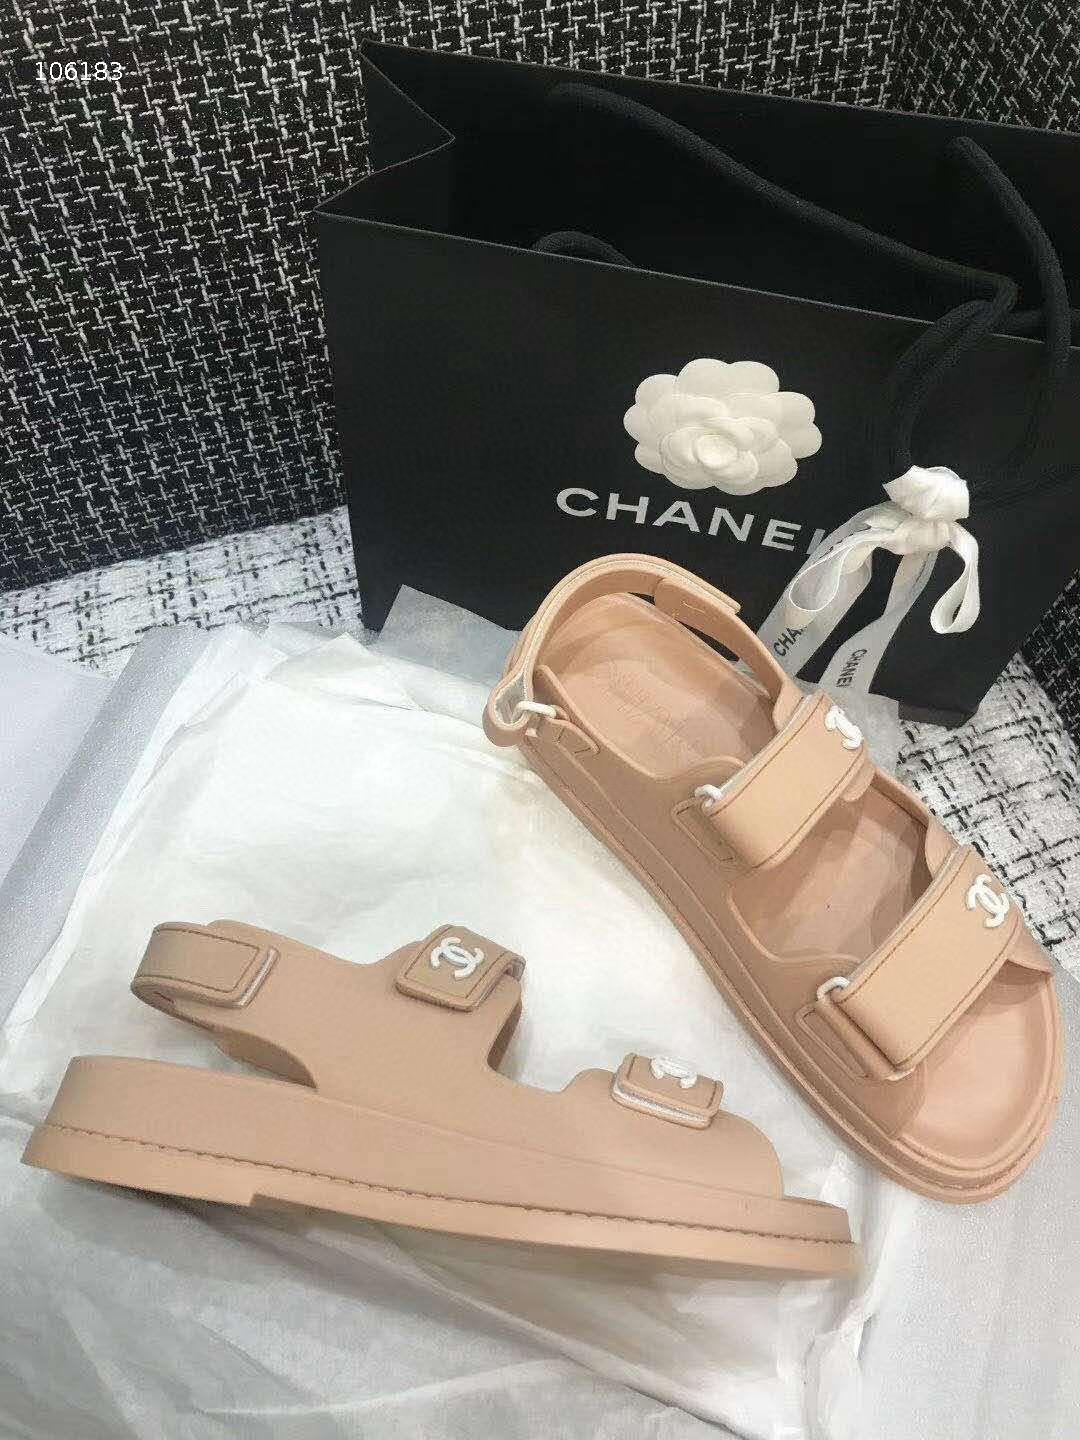 dhgate chanel dupes